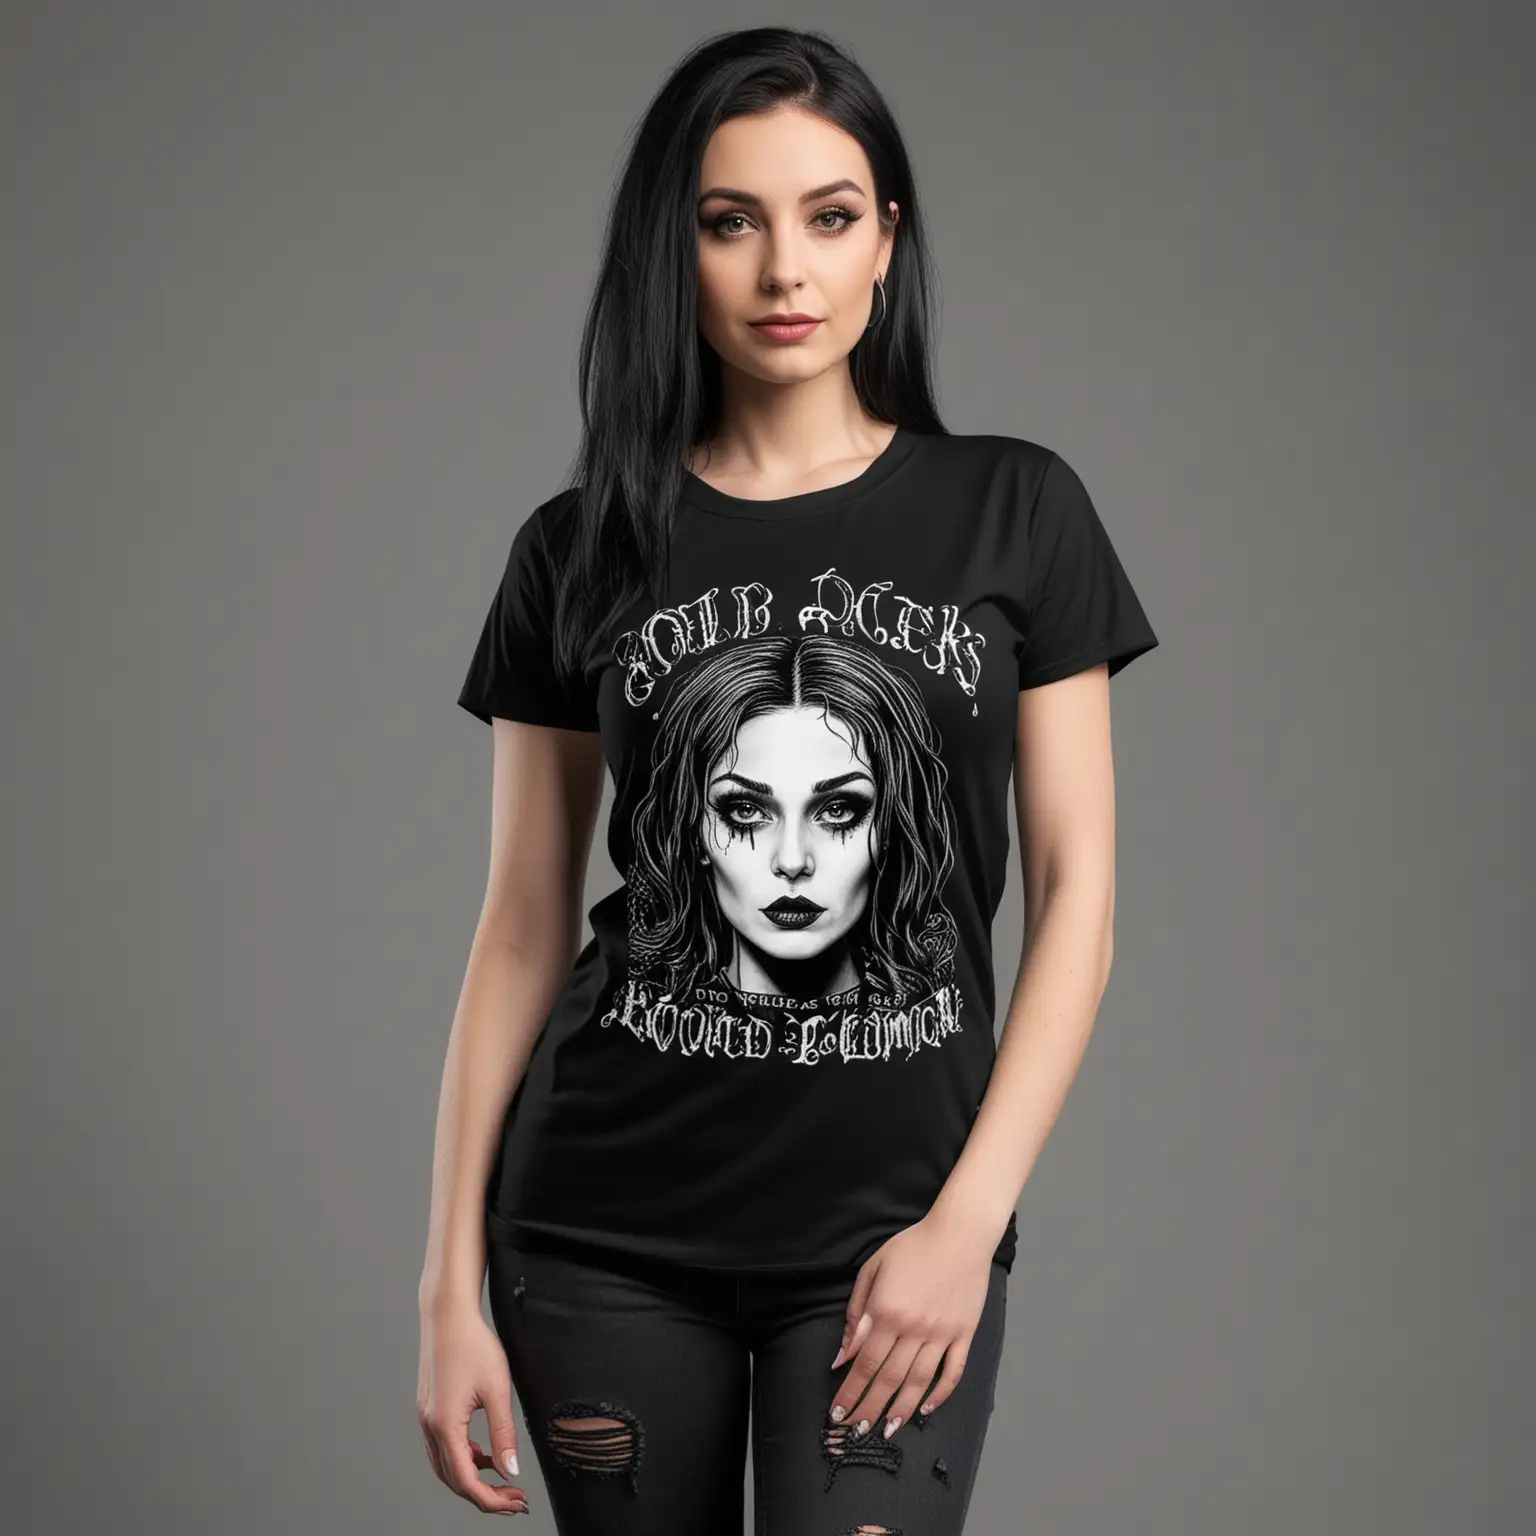 mockup for a black tee.  the model should be female and look like a goth mom